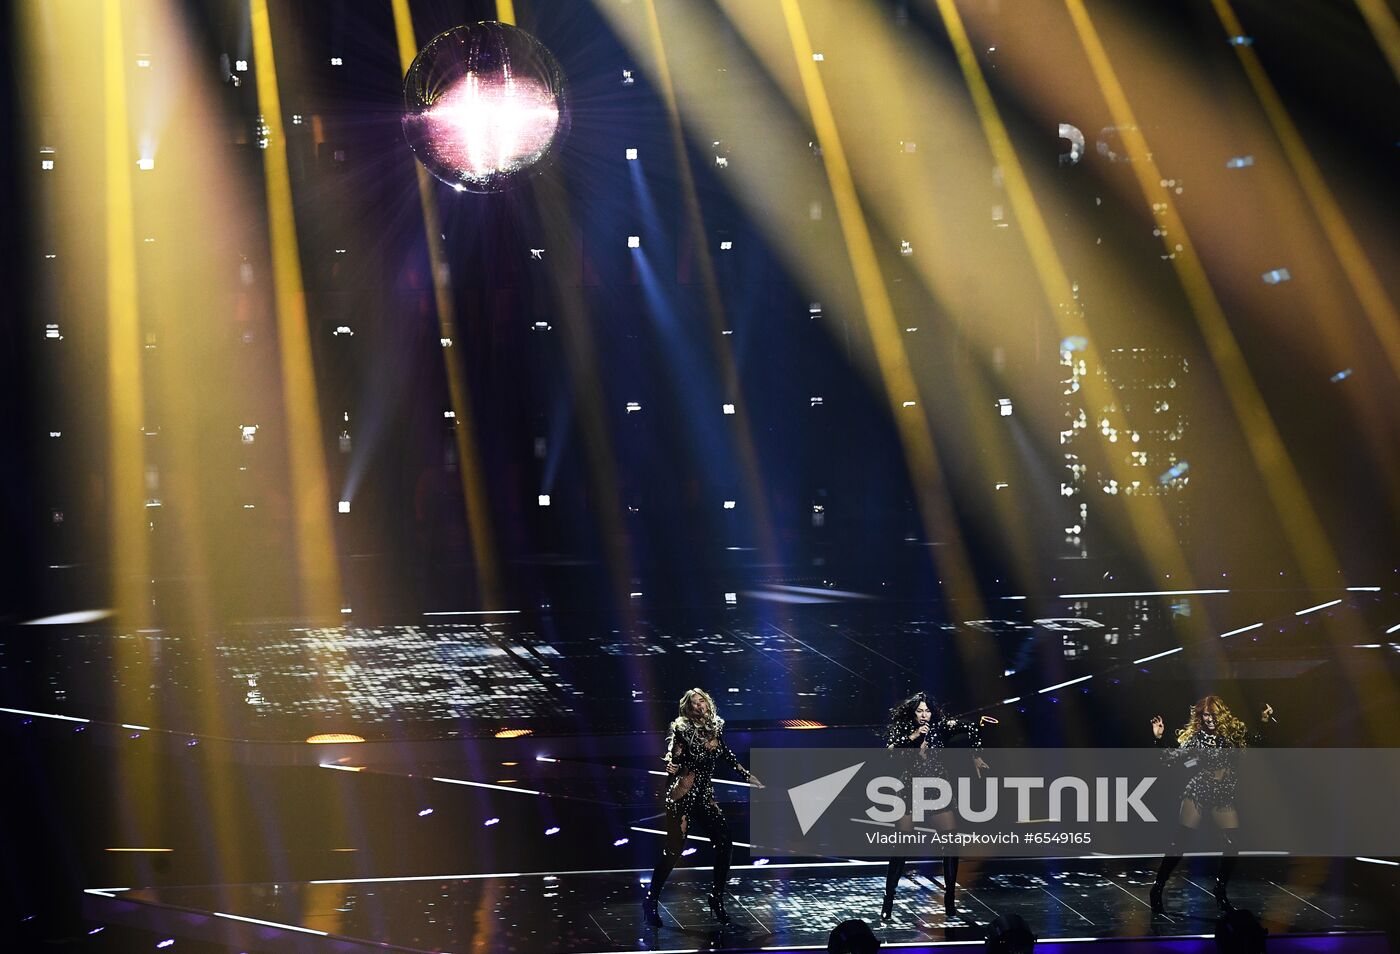 Netherlands Eurovision Song Contest Semi-final 2 Rehearsal